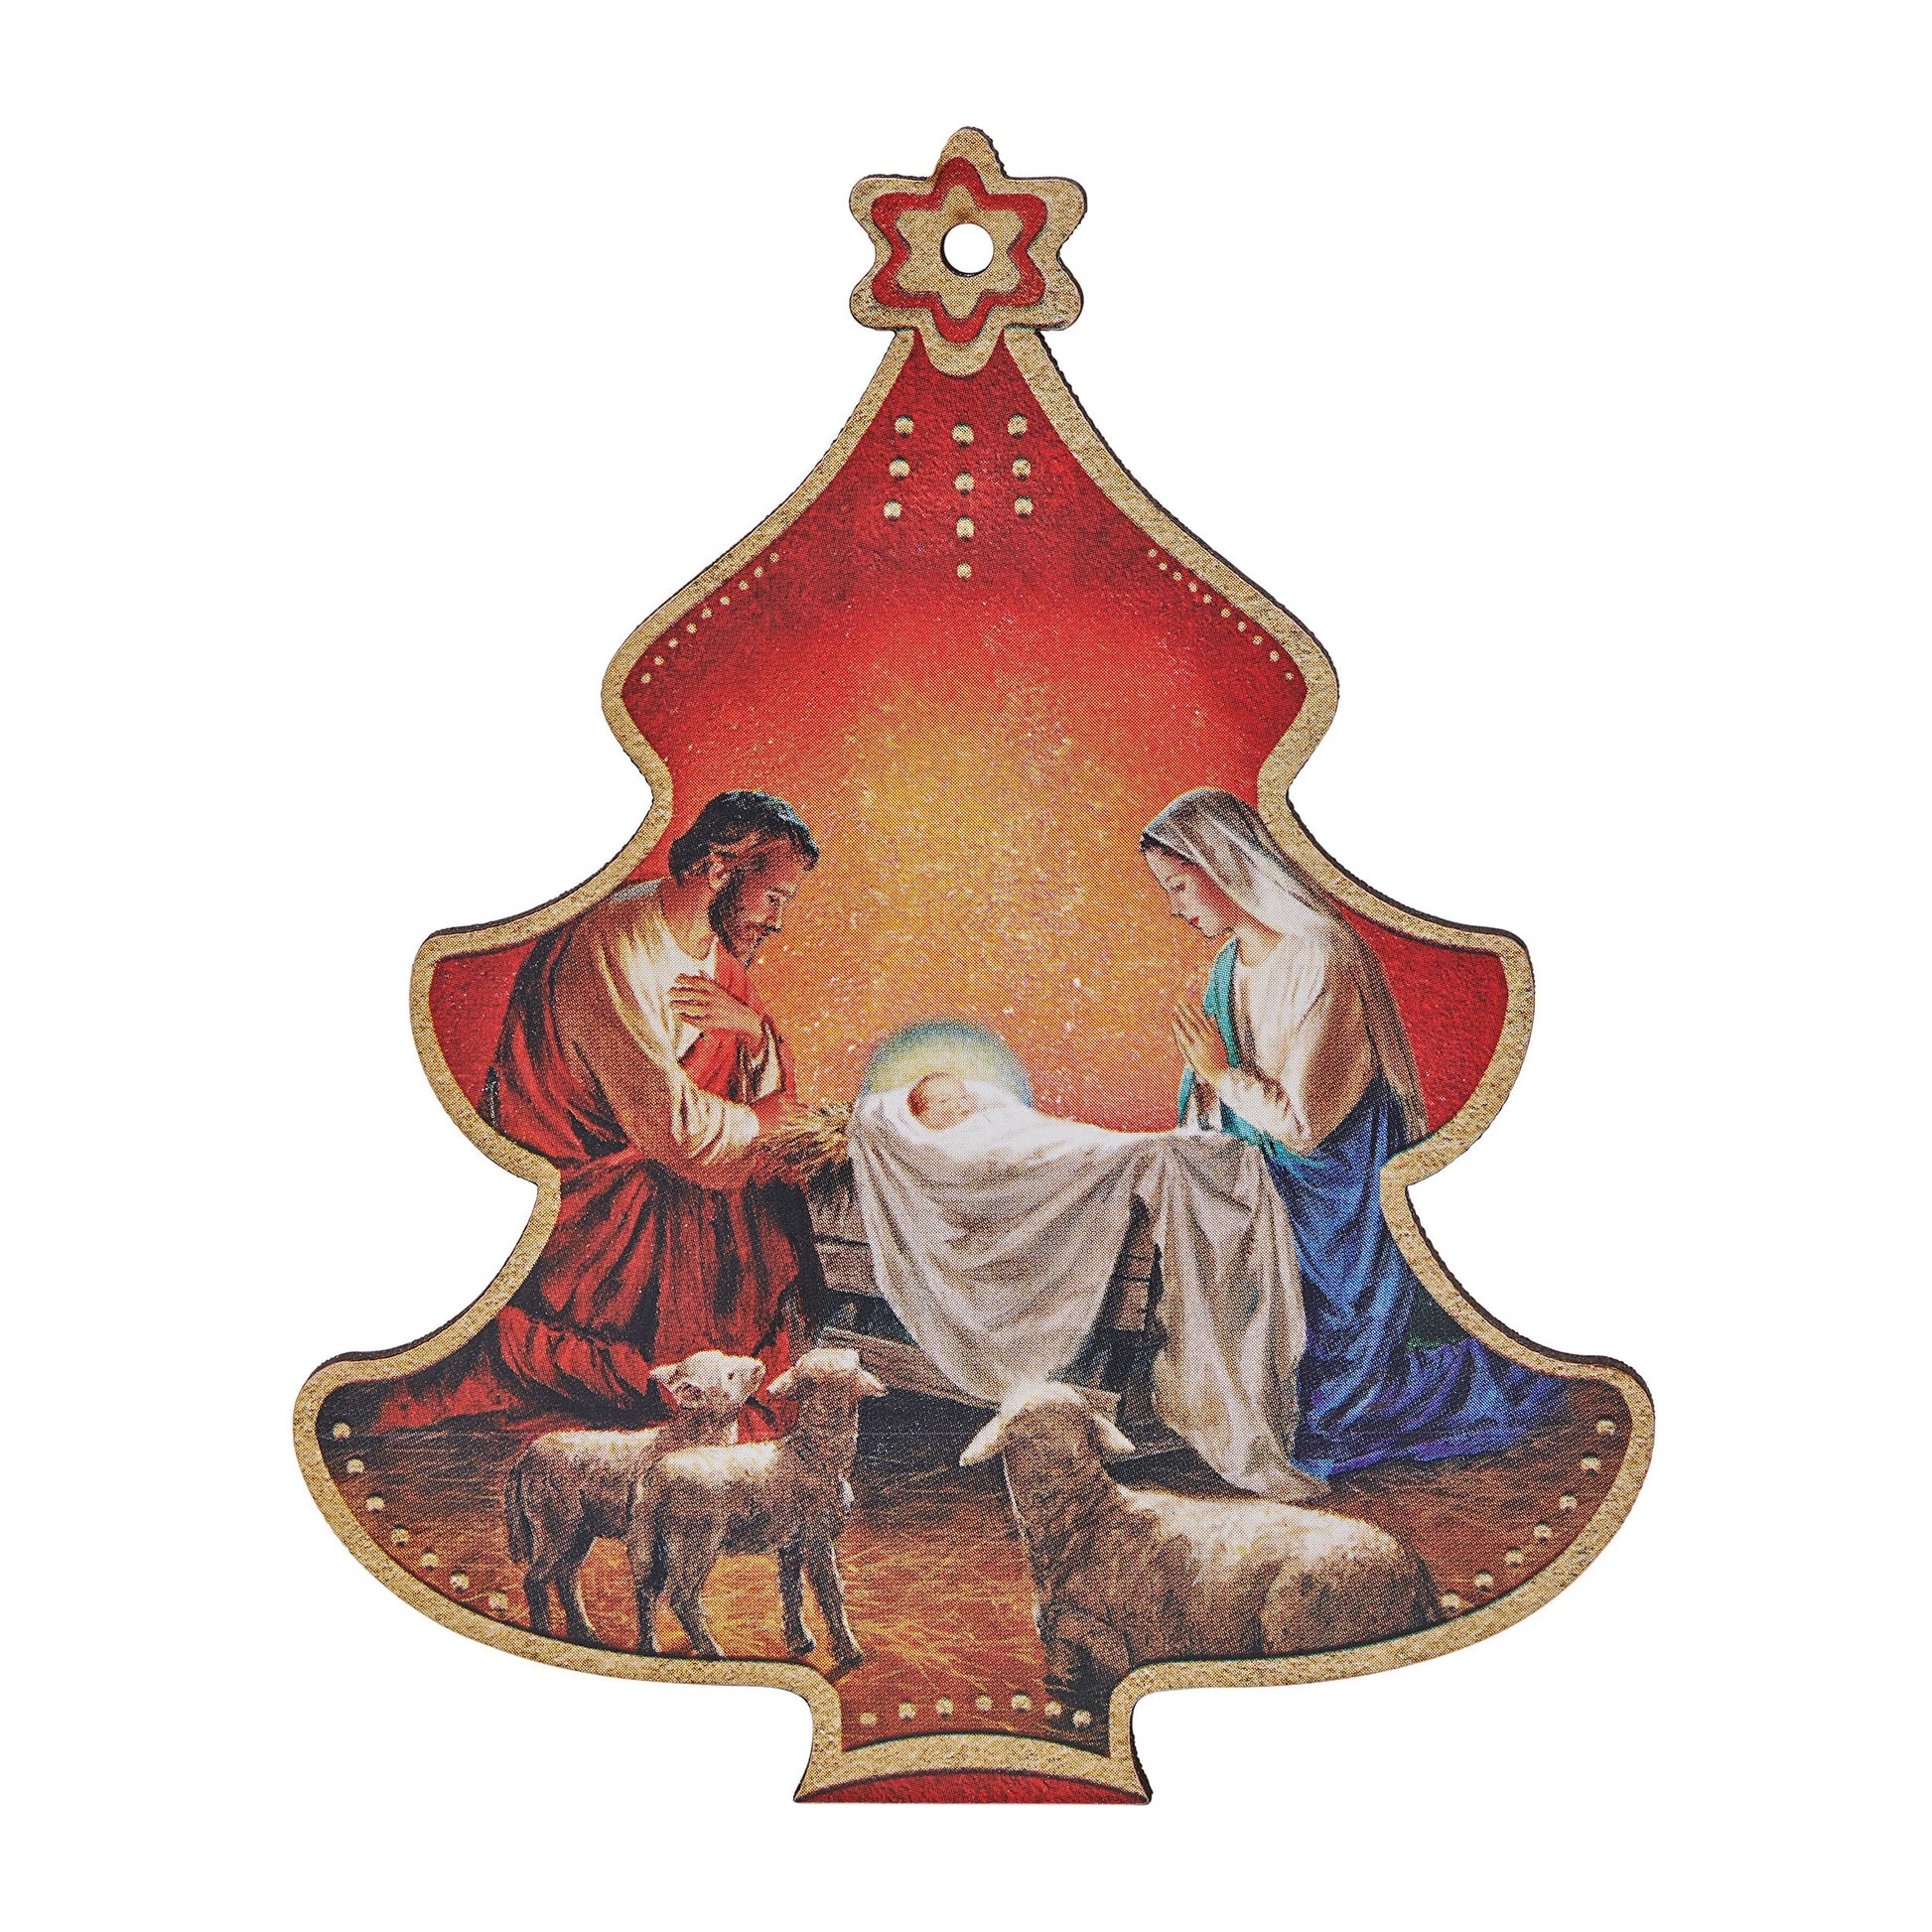 Mondo Cattolico 11 cm (4.33 in) Red Christmas Tree-shaped Christmas Decoration With Nativity Scene